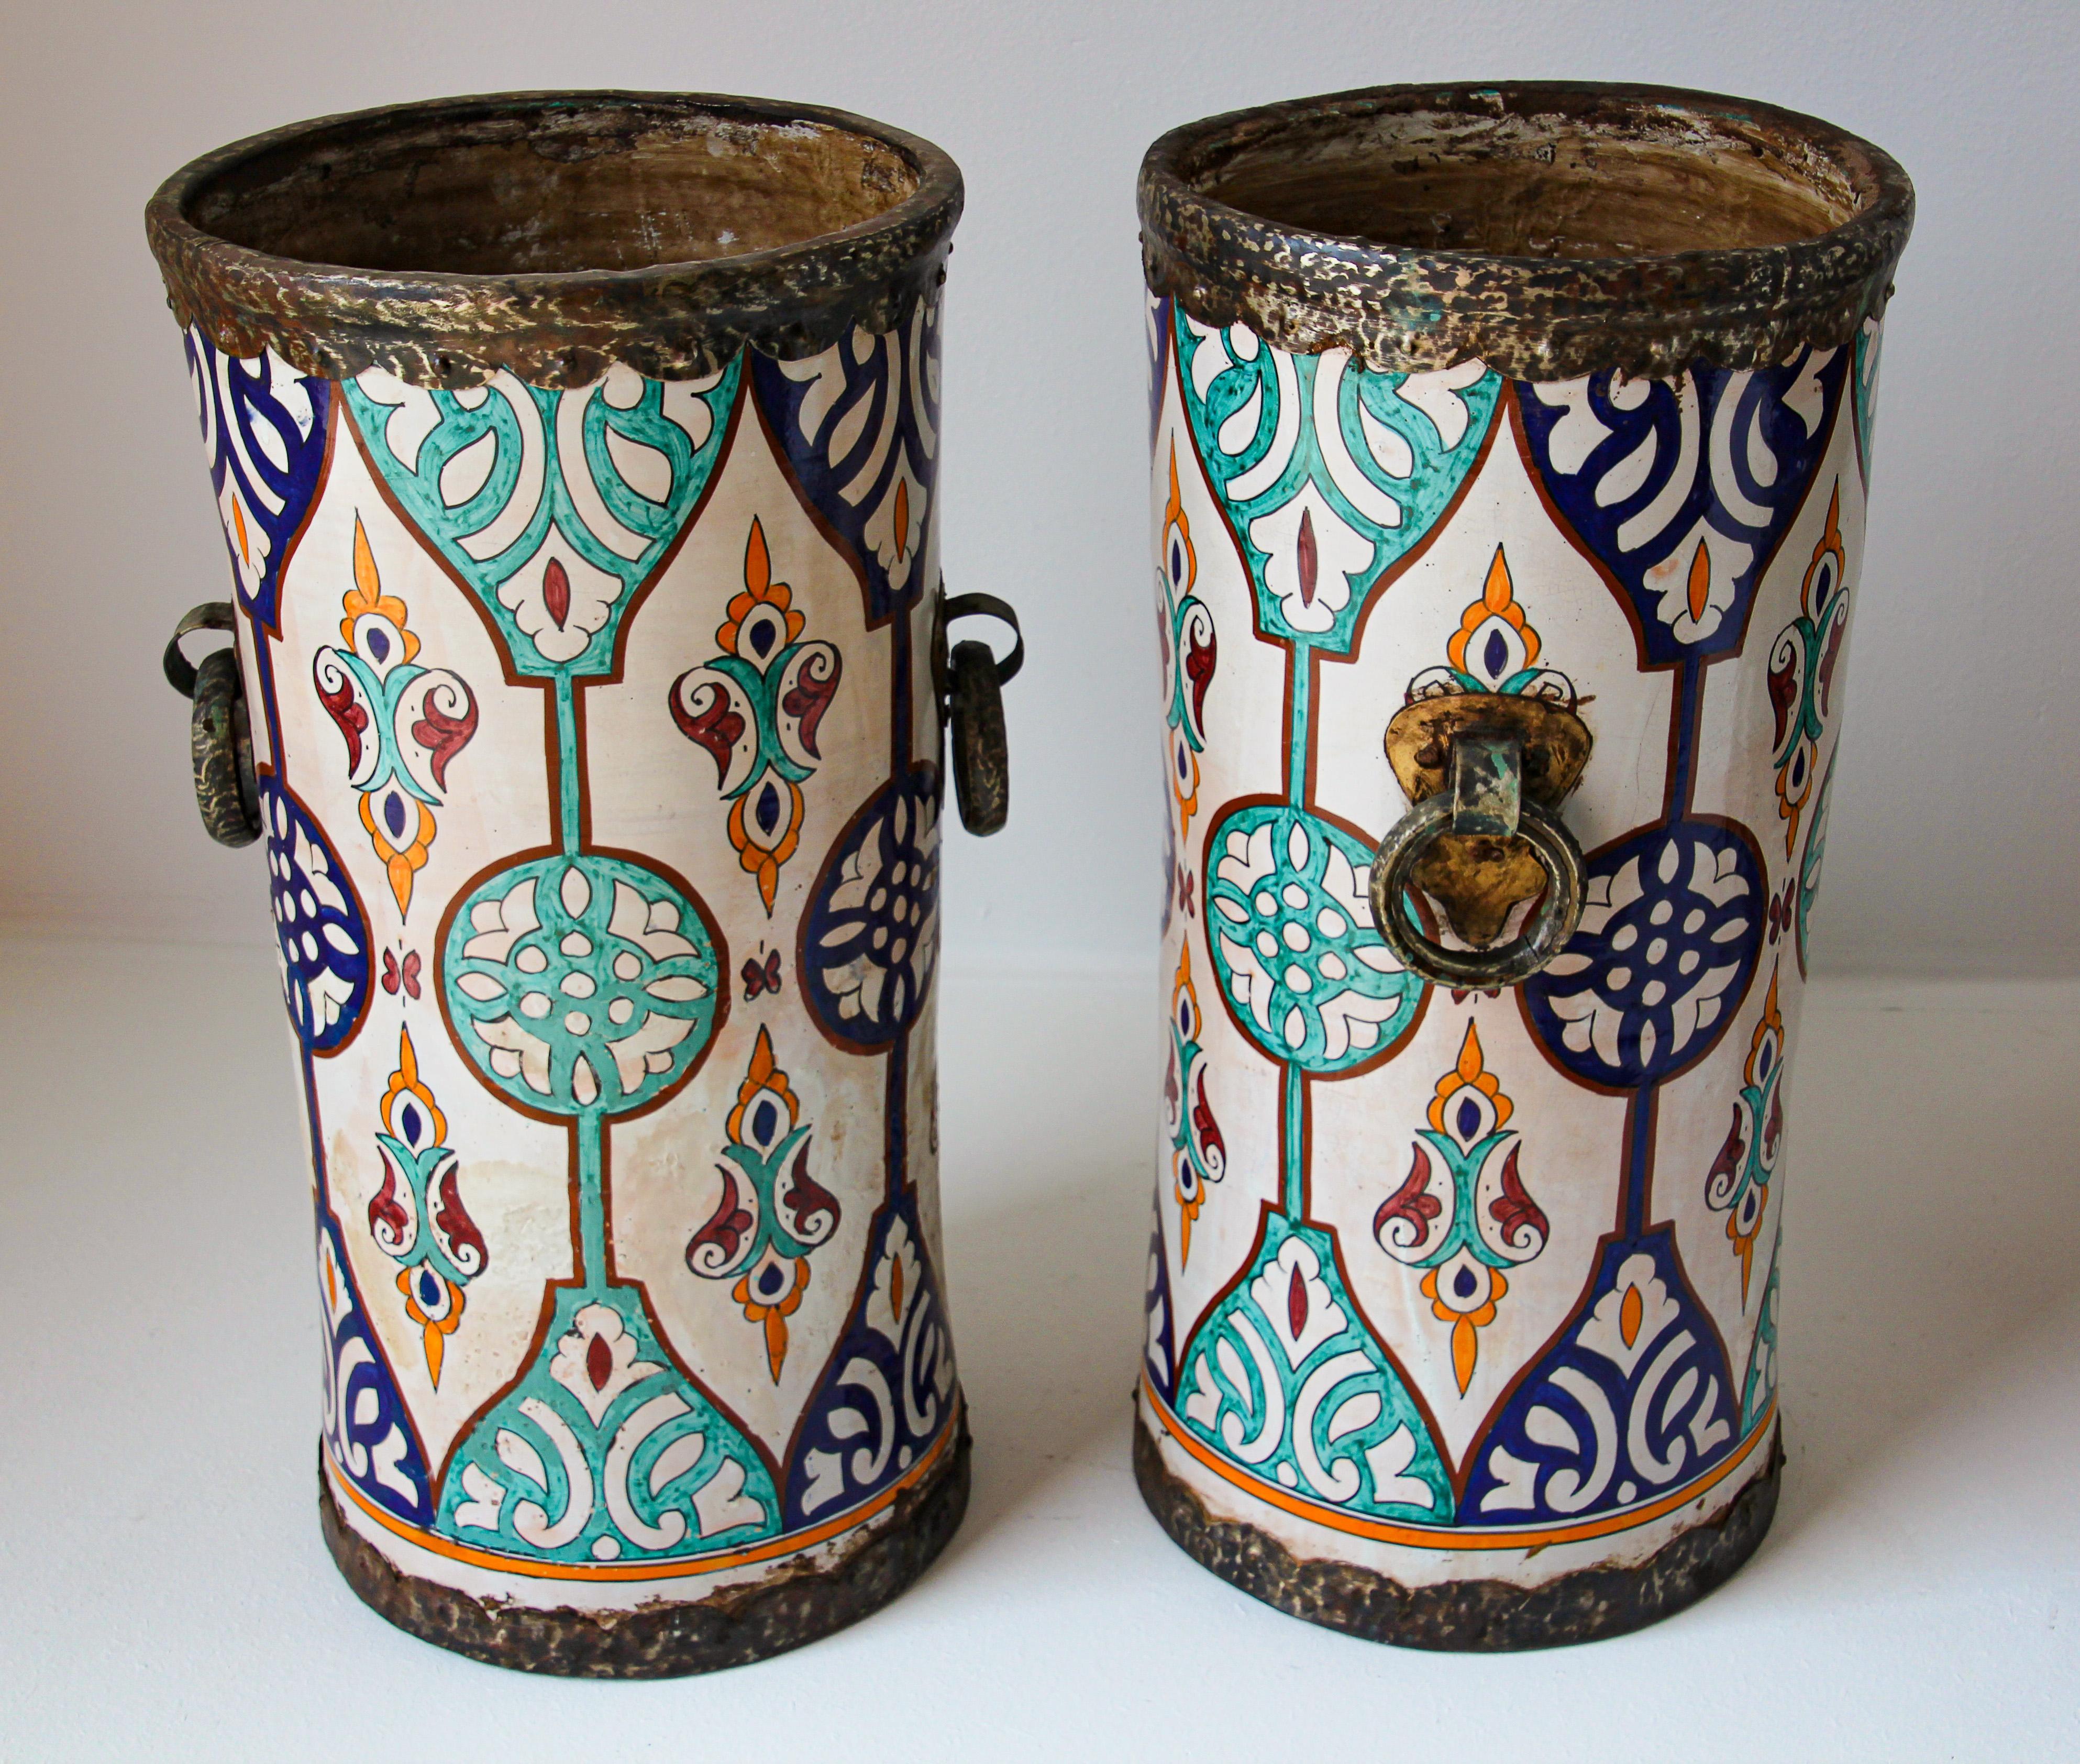 Handcrafted Moorish Ceramic Planters with Handles In Good Condition For Sale In North Hollywood, CA